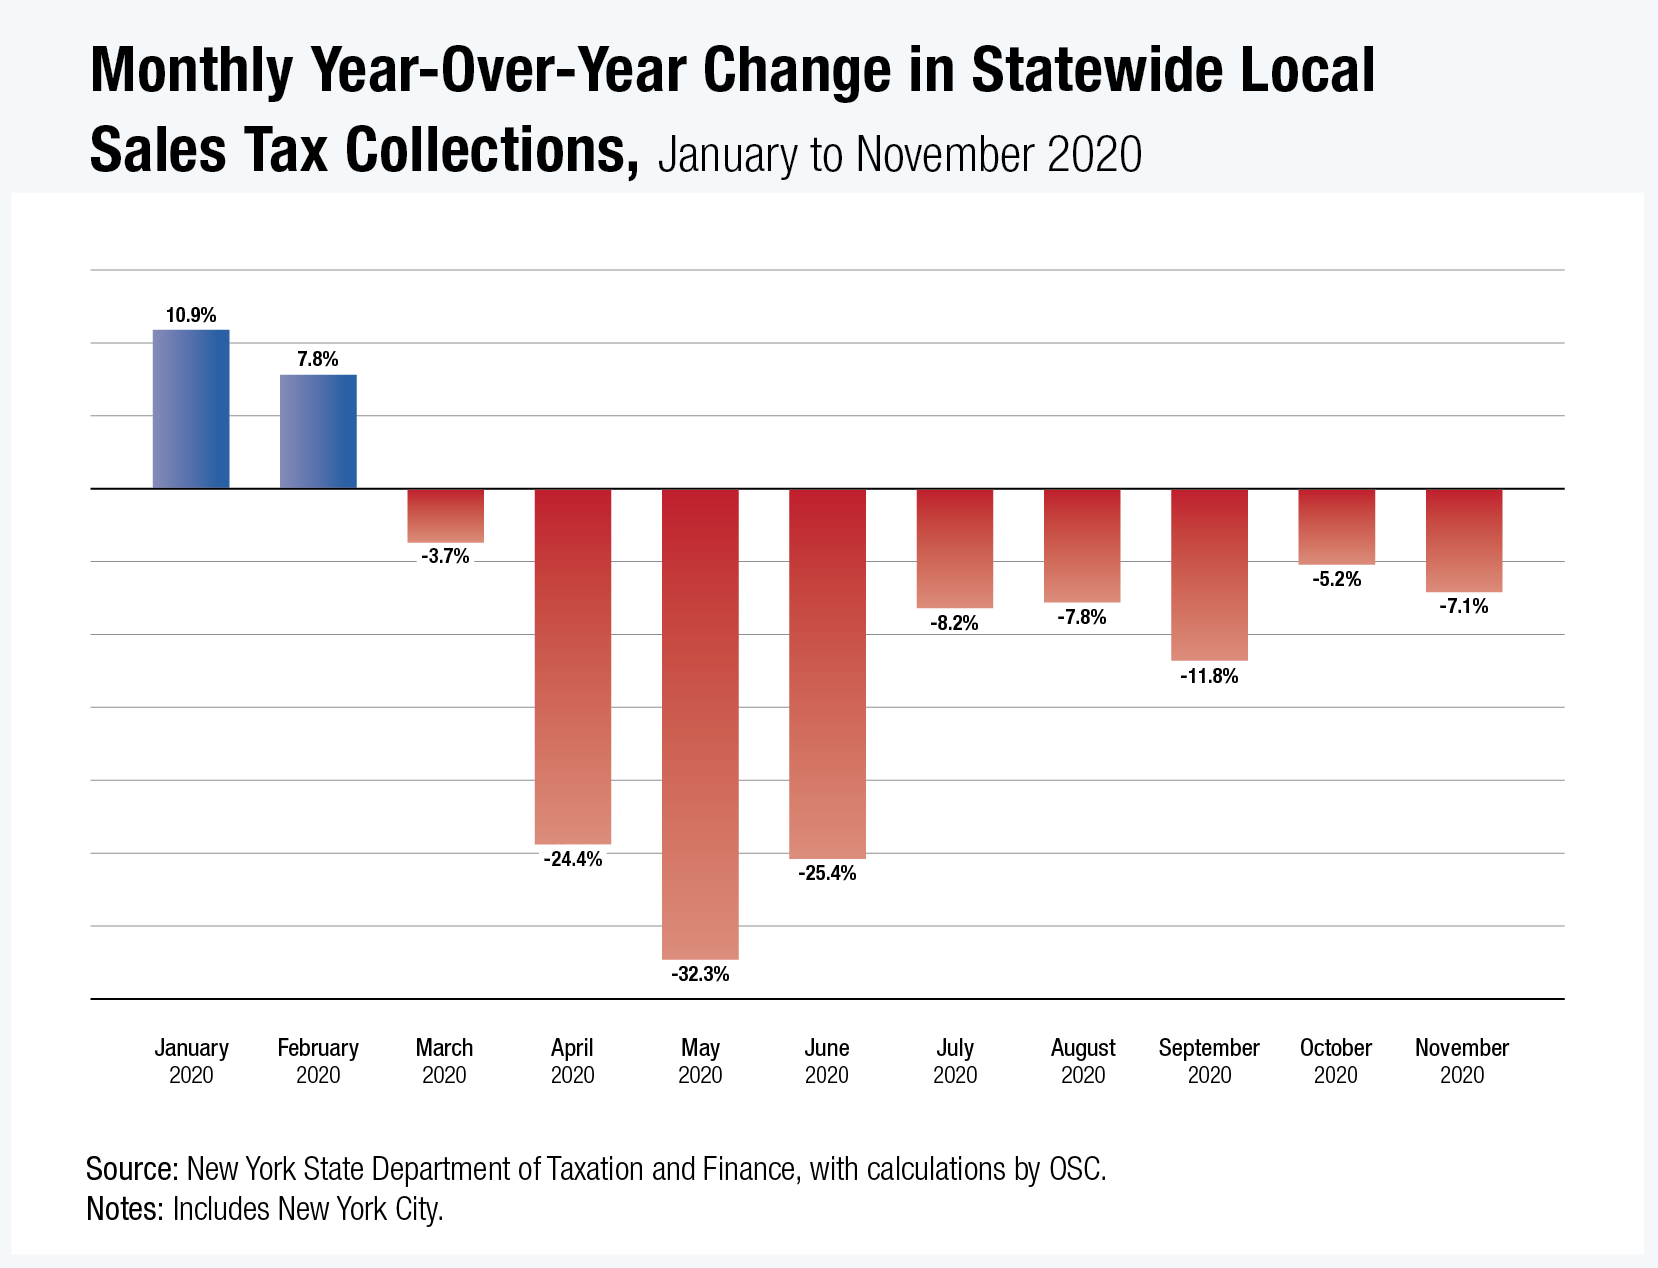 Monthly Year-Over-Year Change in Statewide Local Sales Tax Collections, Jan-Oct 2020